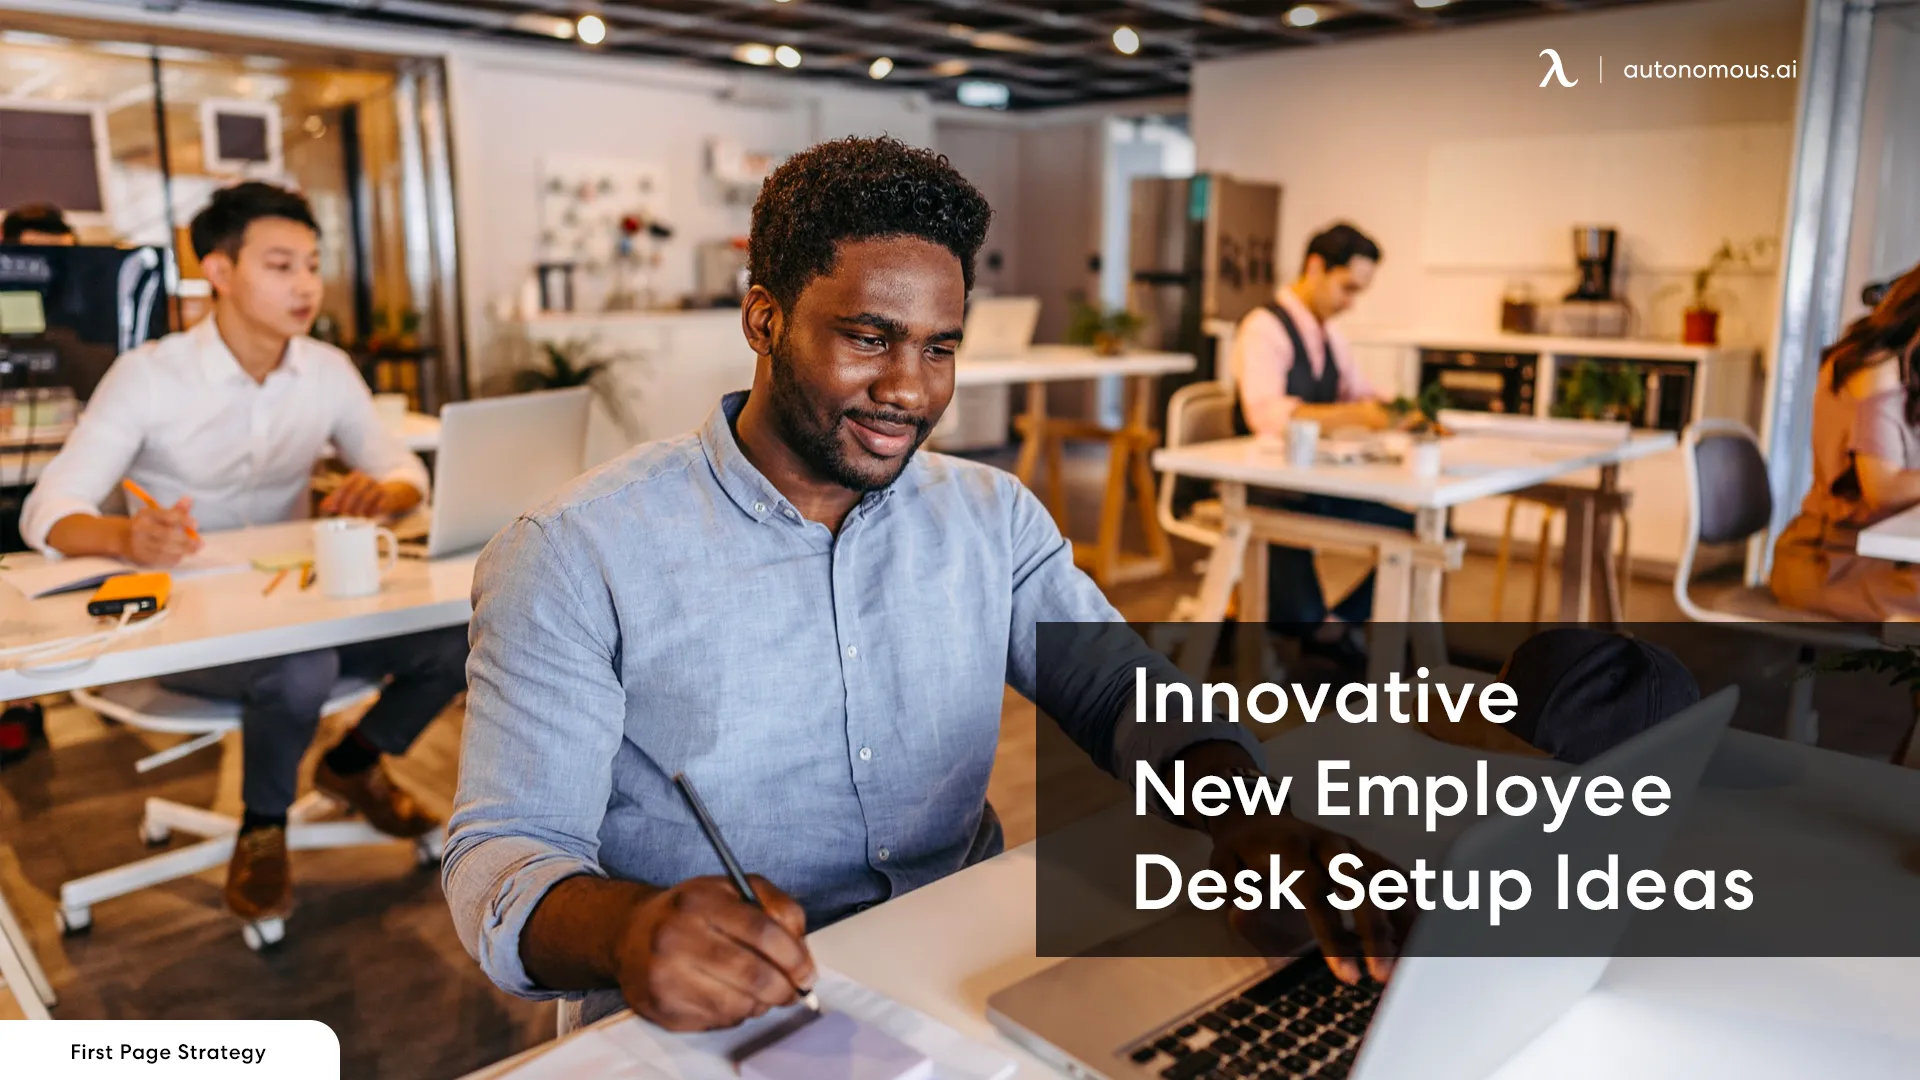 Welcoming New Employees: Tips for a Perfect Desk Setup